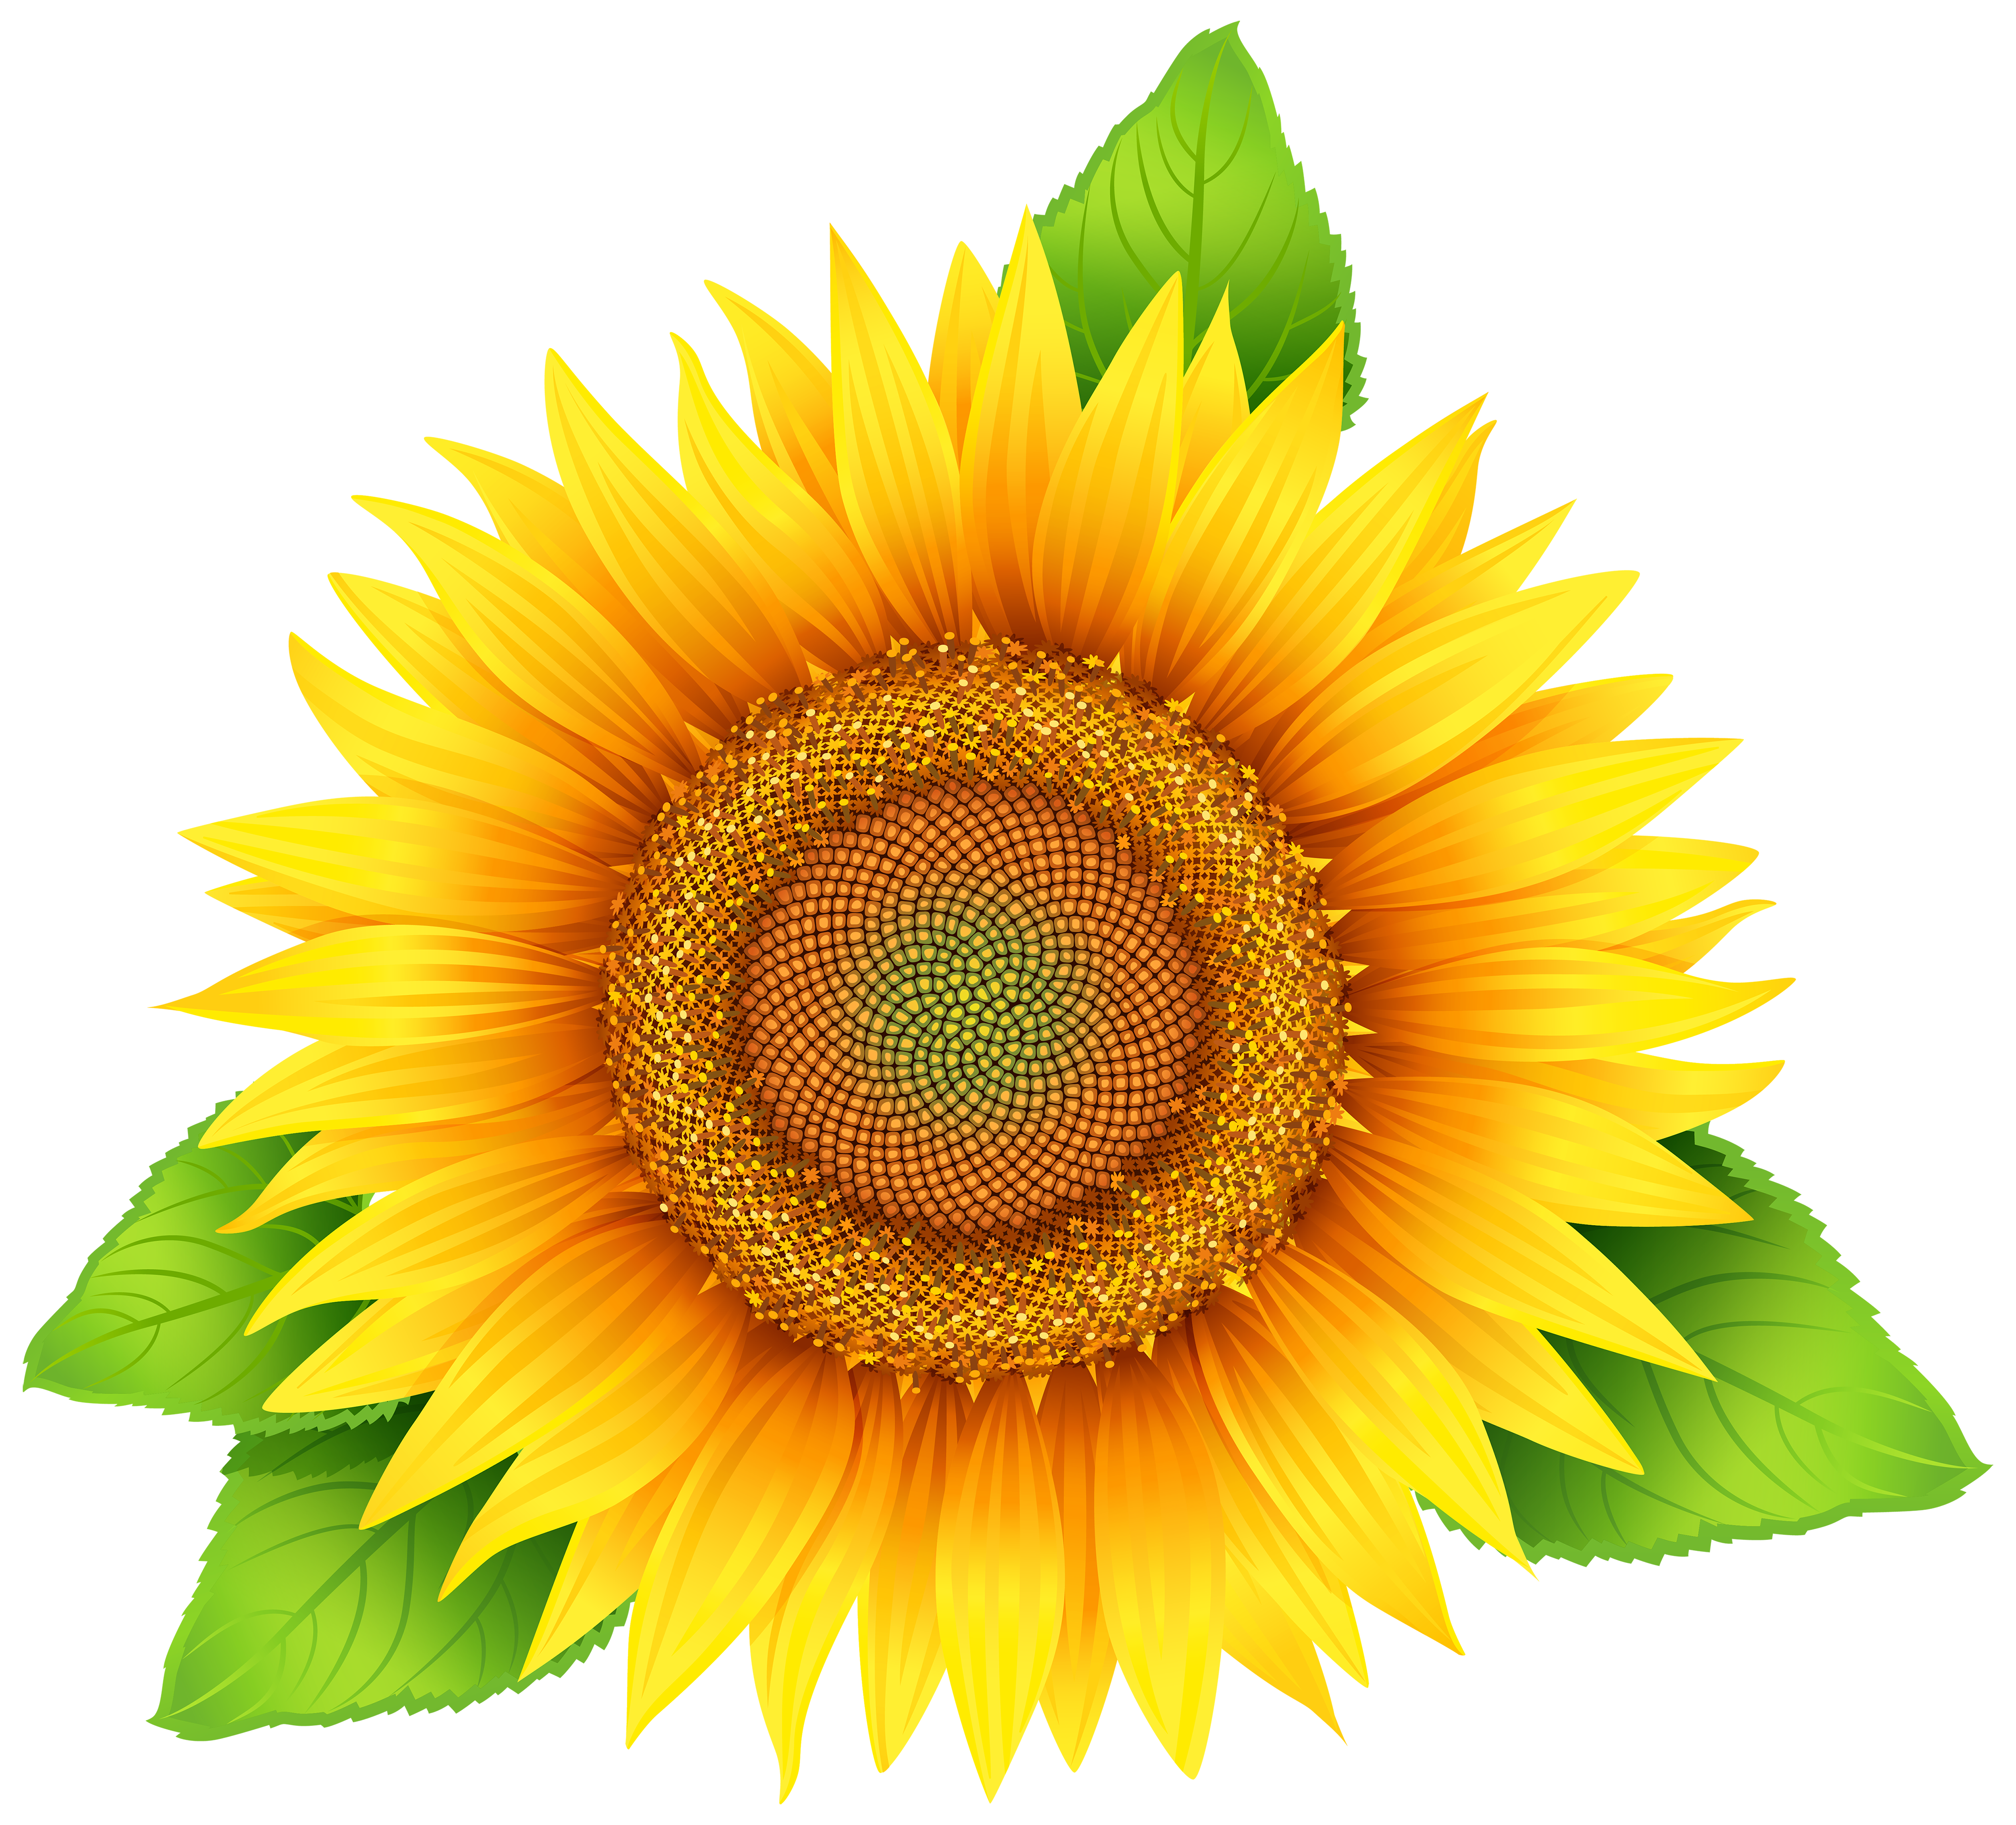 Sunflower PNG Clipart Image | Gallery Yopriceville - High ...